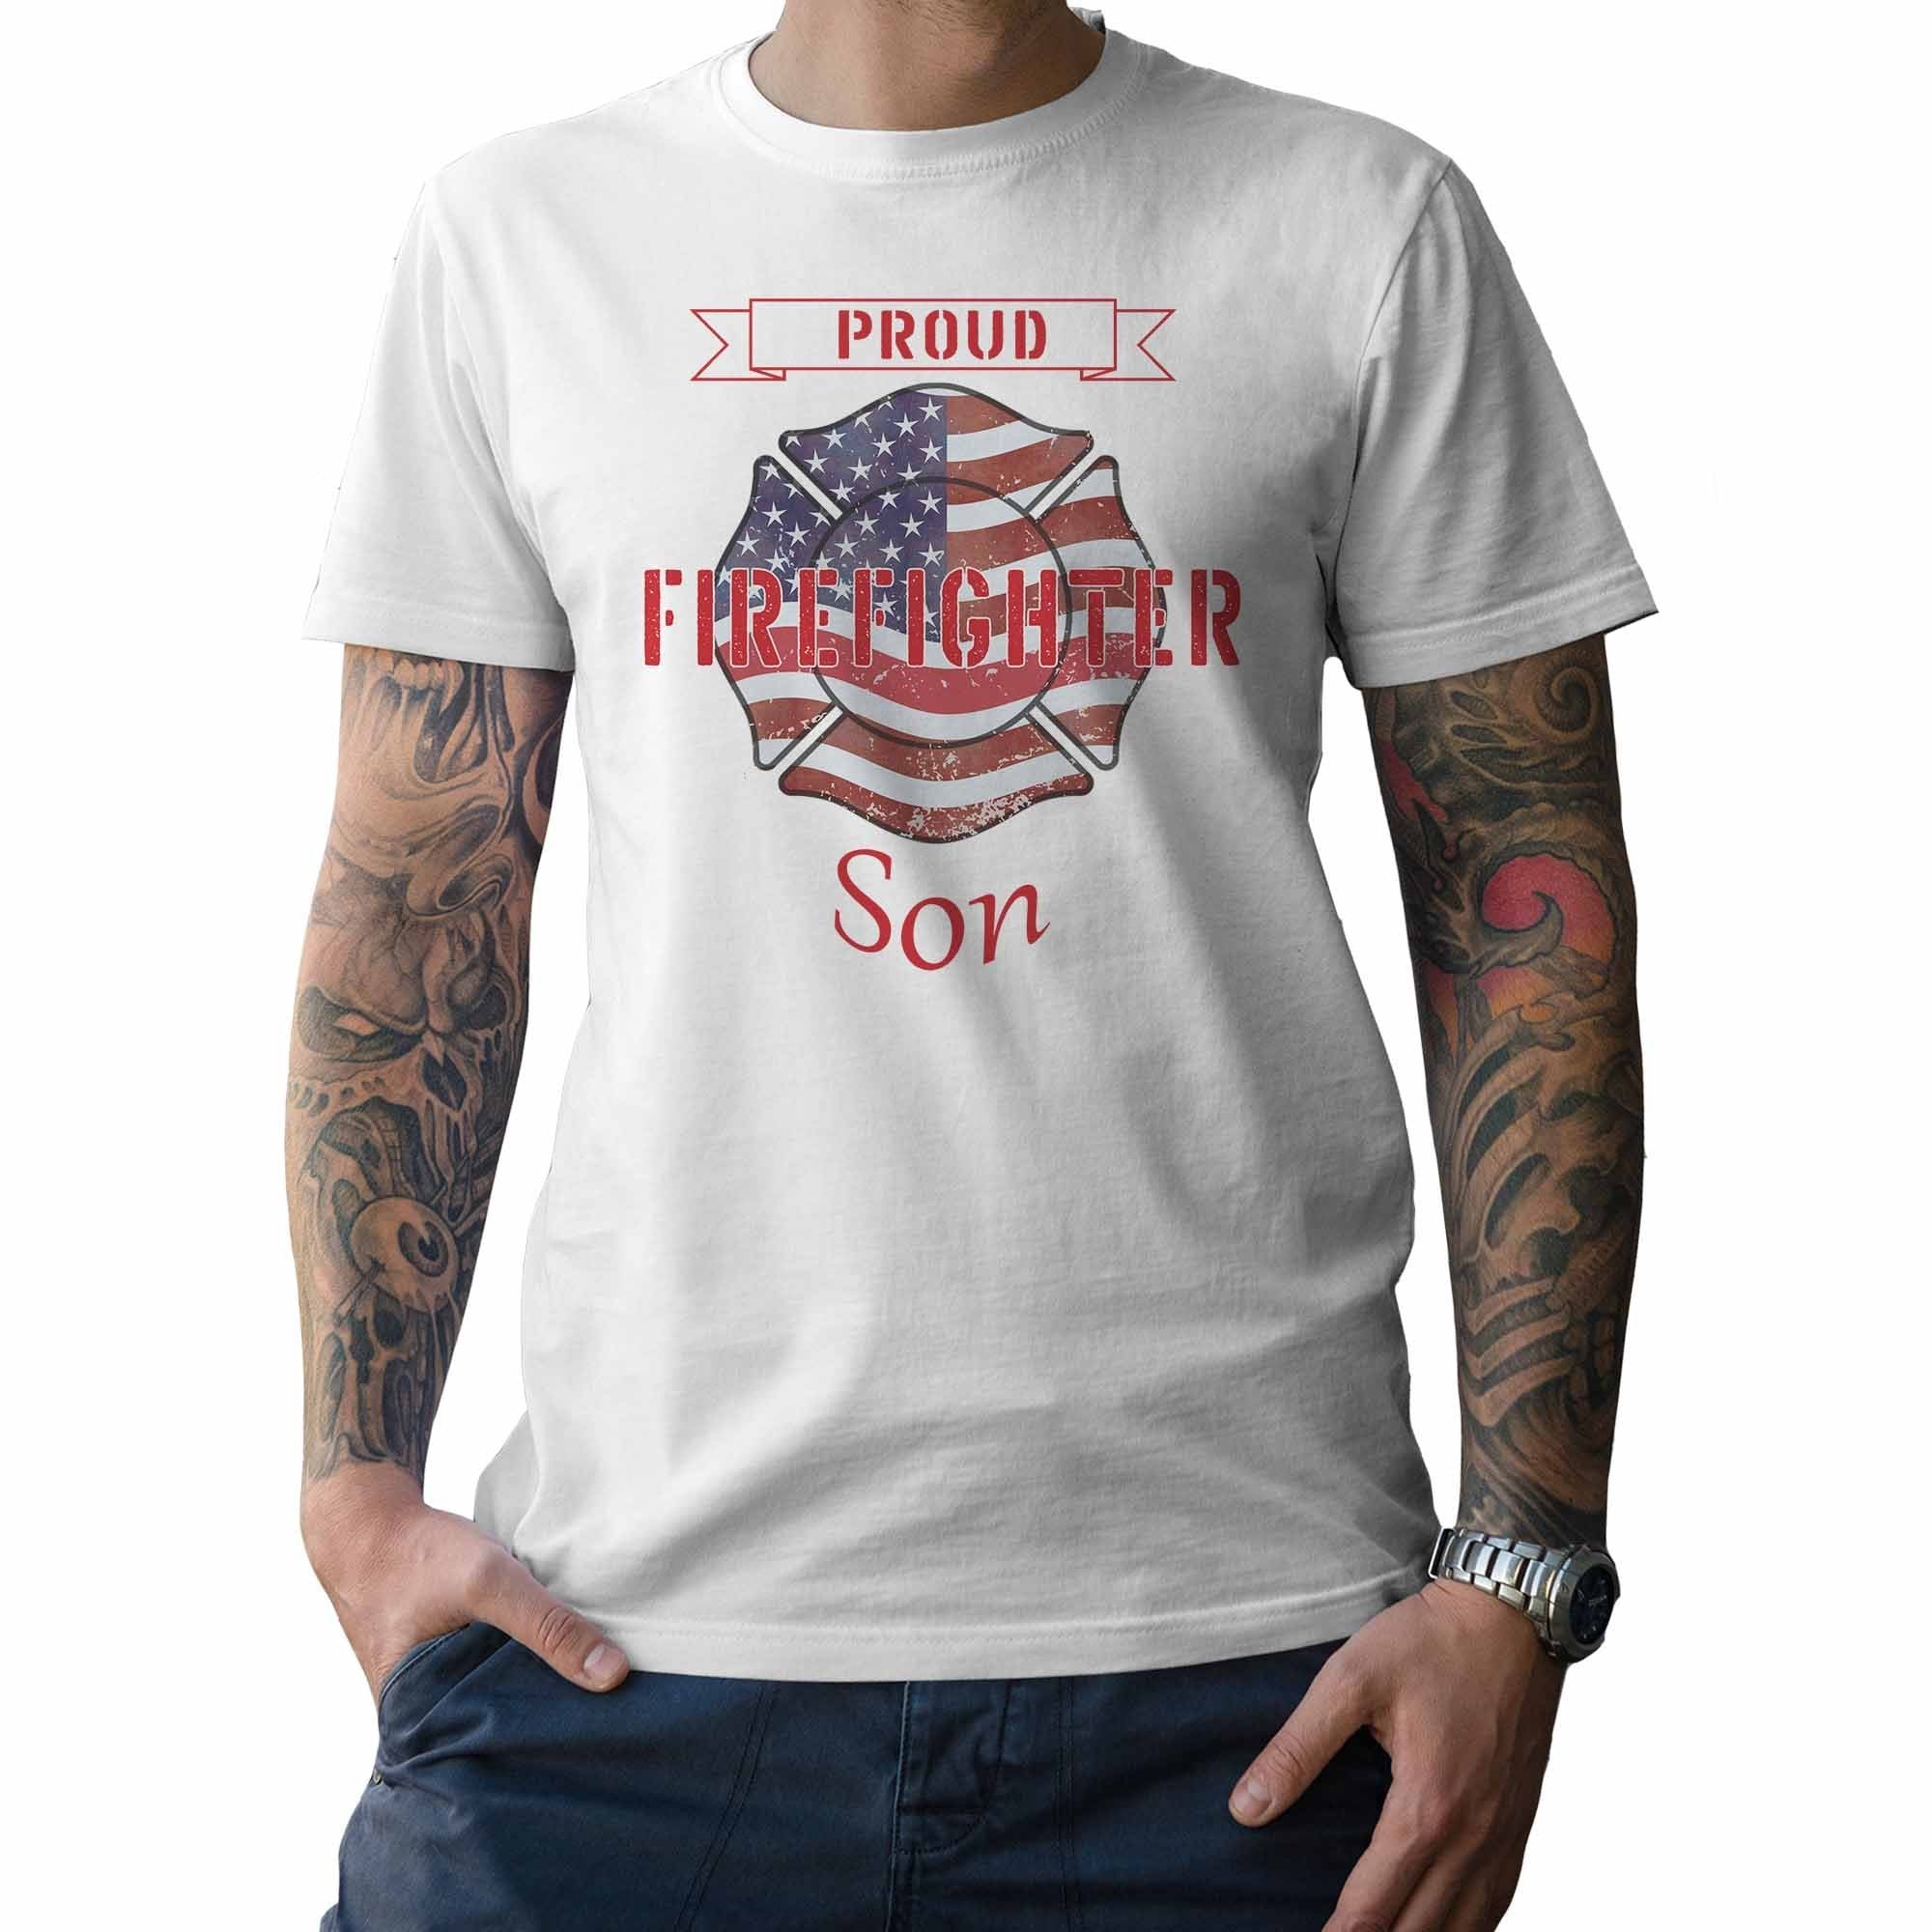 Proud Firefighter Son - My Custom Tee Party